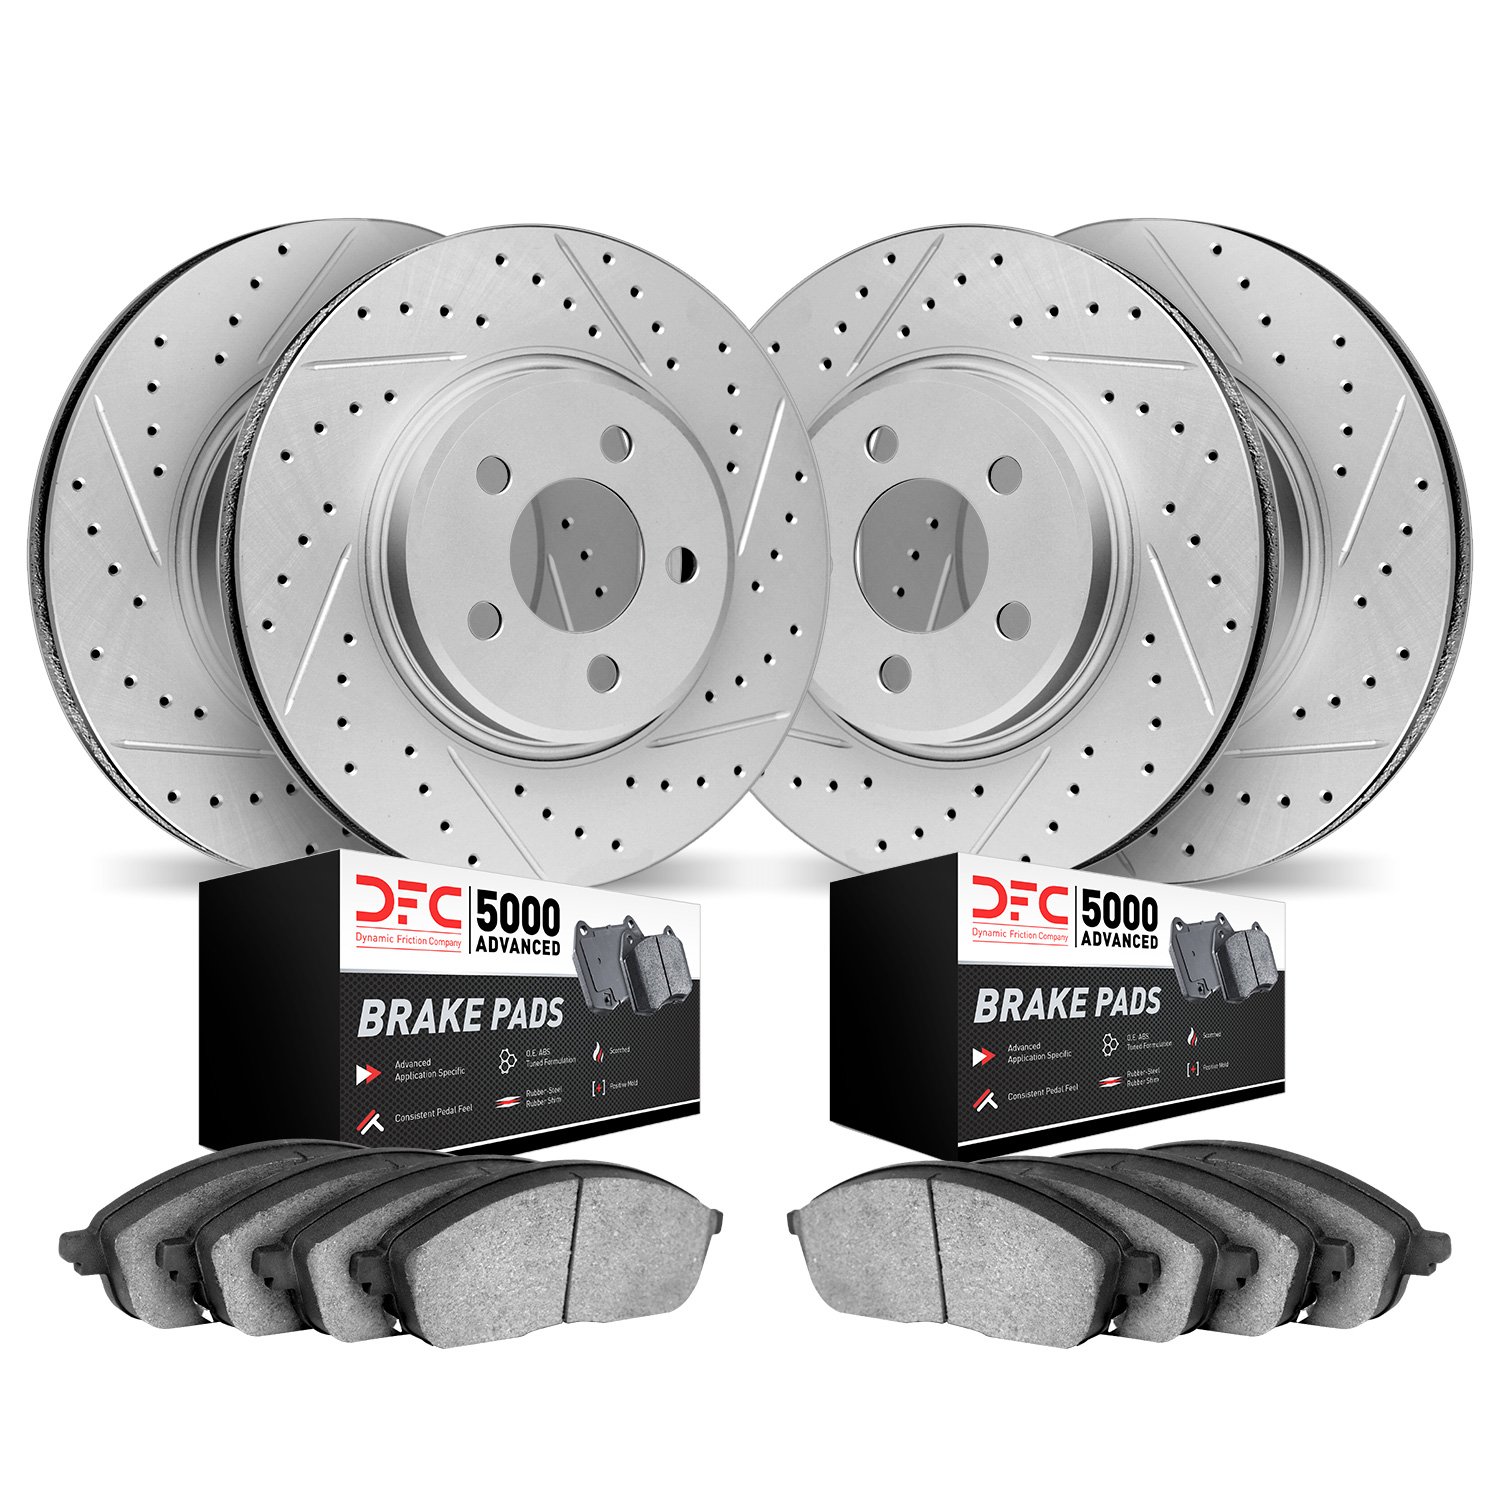 2504-31042 Geoperformance Drilled/Slotted Rotors w/5000 Advanced Brake Pads Kit, 2016-2020 BMW, Position: Front and Rear